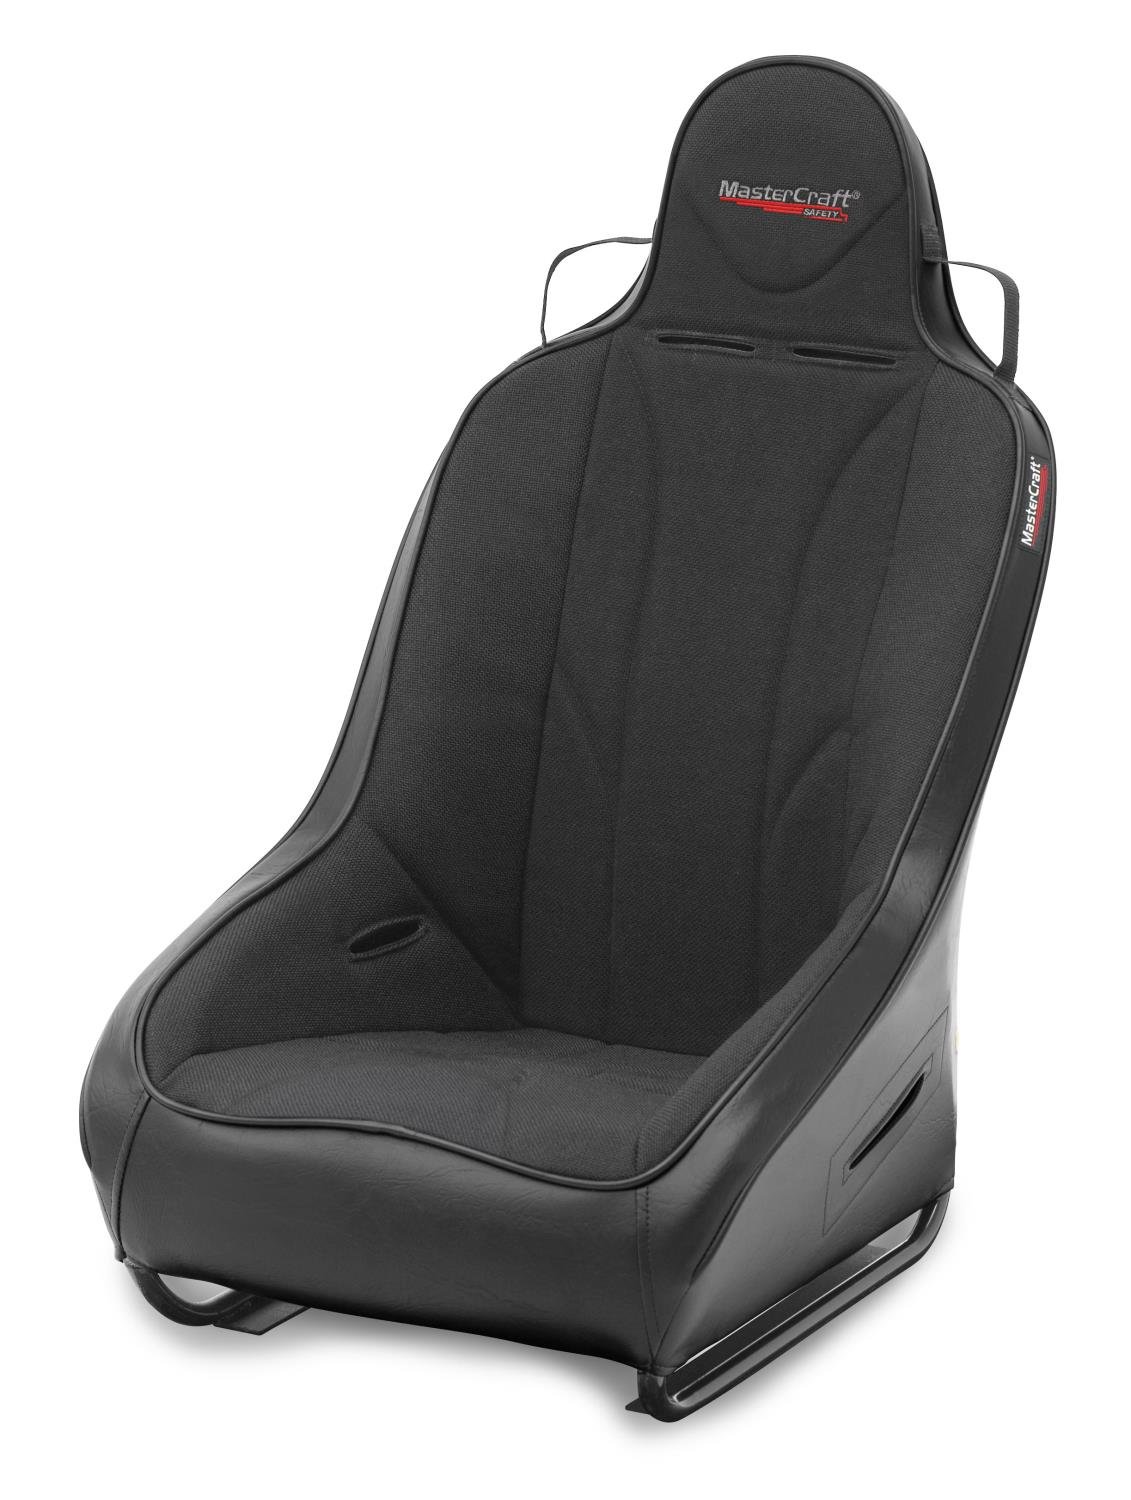 560114 1 in. WIDER PROSeat w/Fixed Headrest, Black with Black Fabric Center and Side Panels, Black Band w/BRS Stitch Pattern